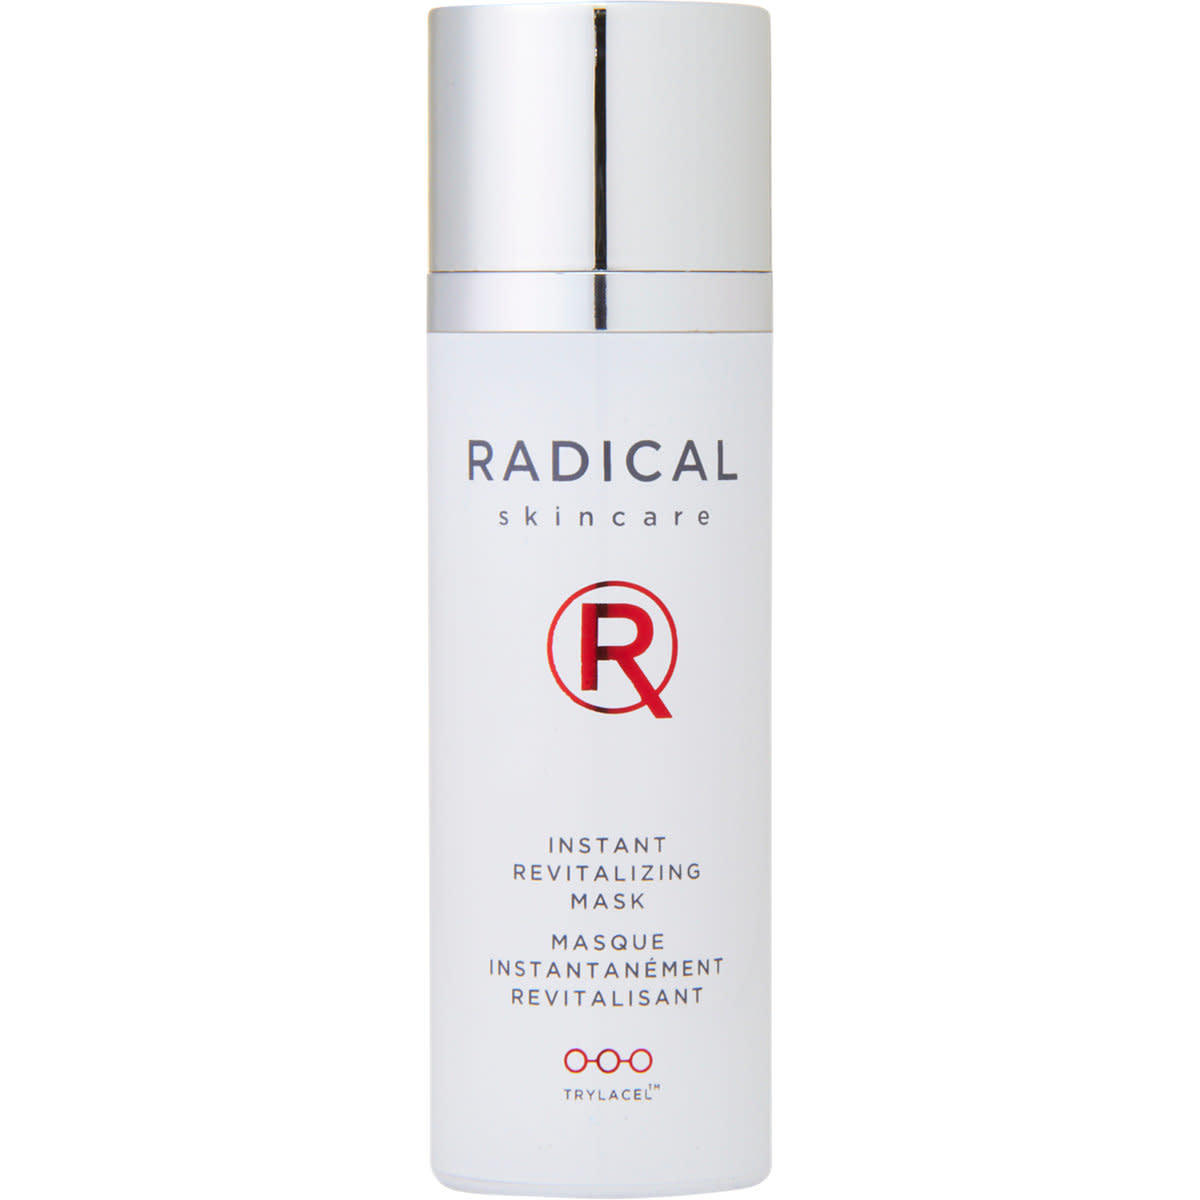 Will Radical Skincare’s Instant Revitalizing Mask Give You a Glow?